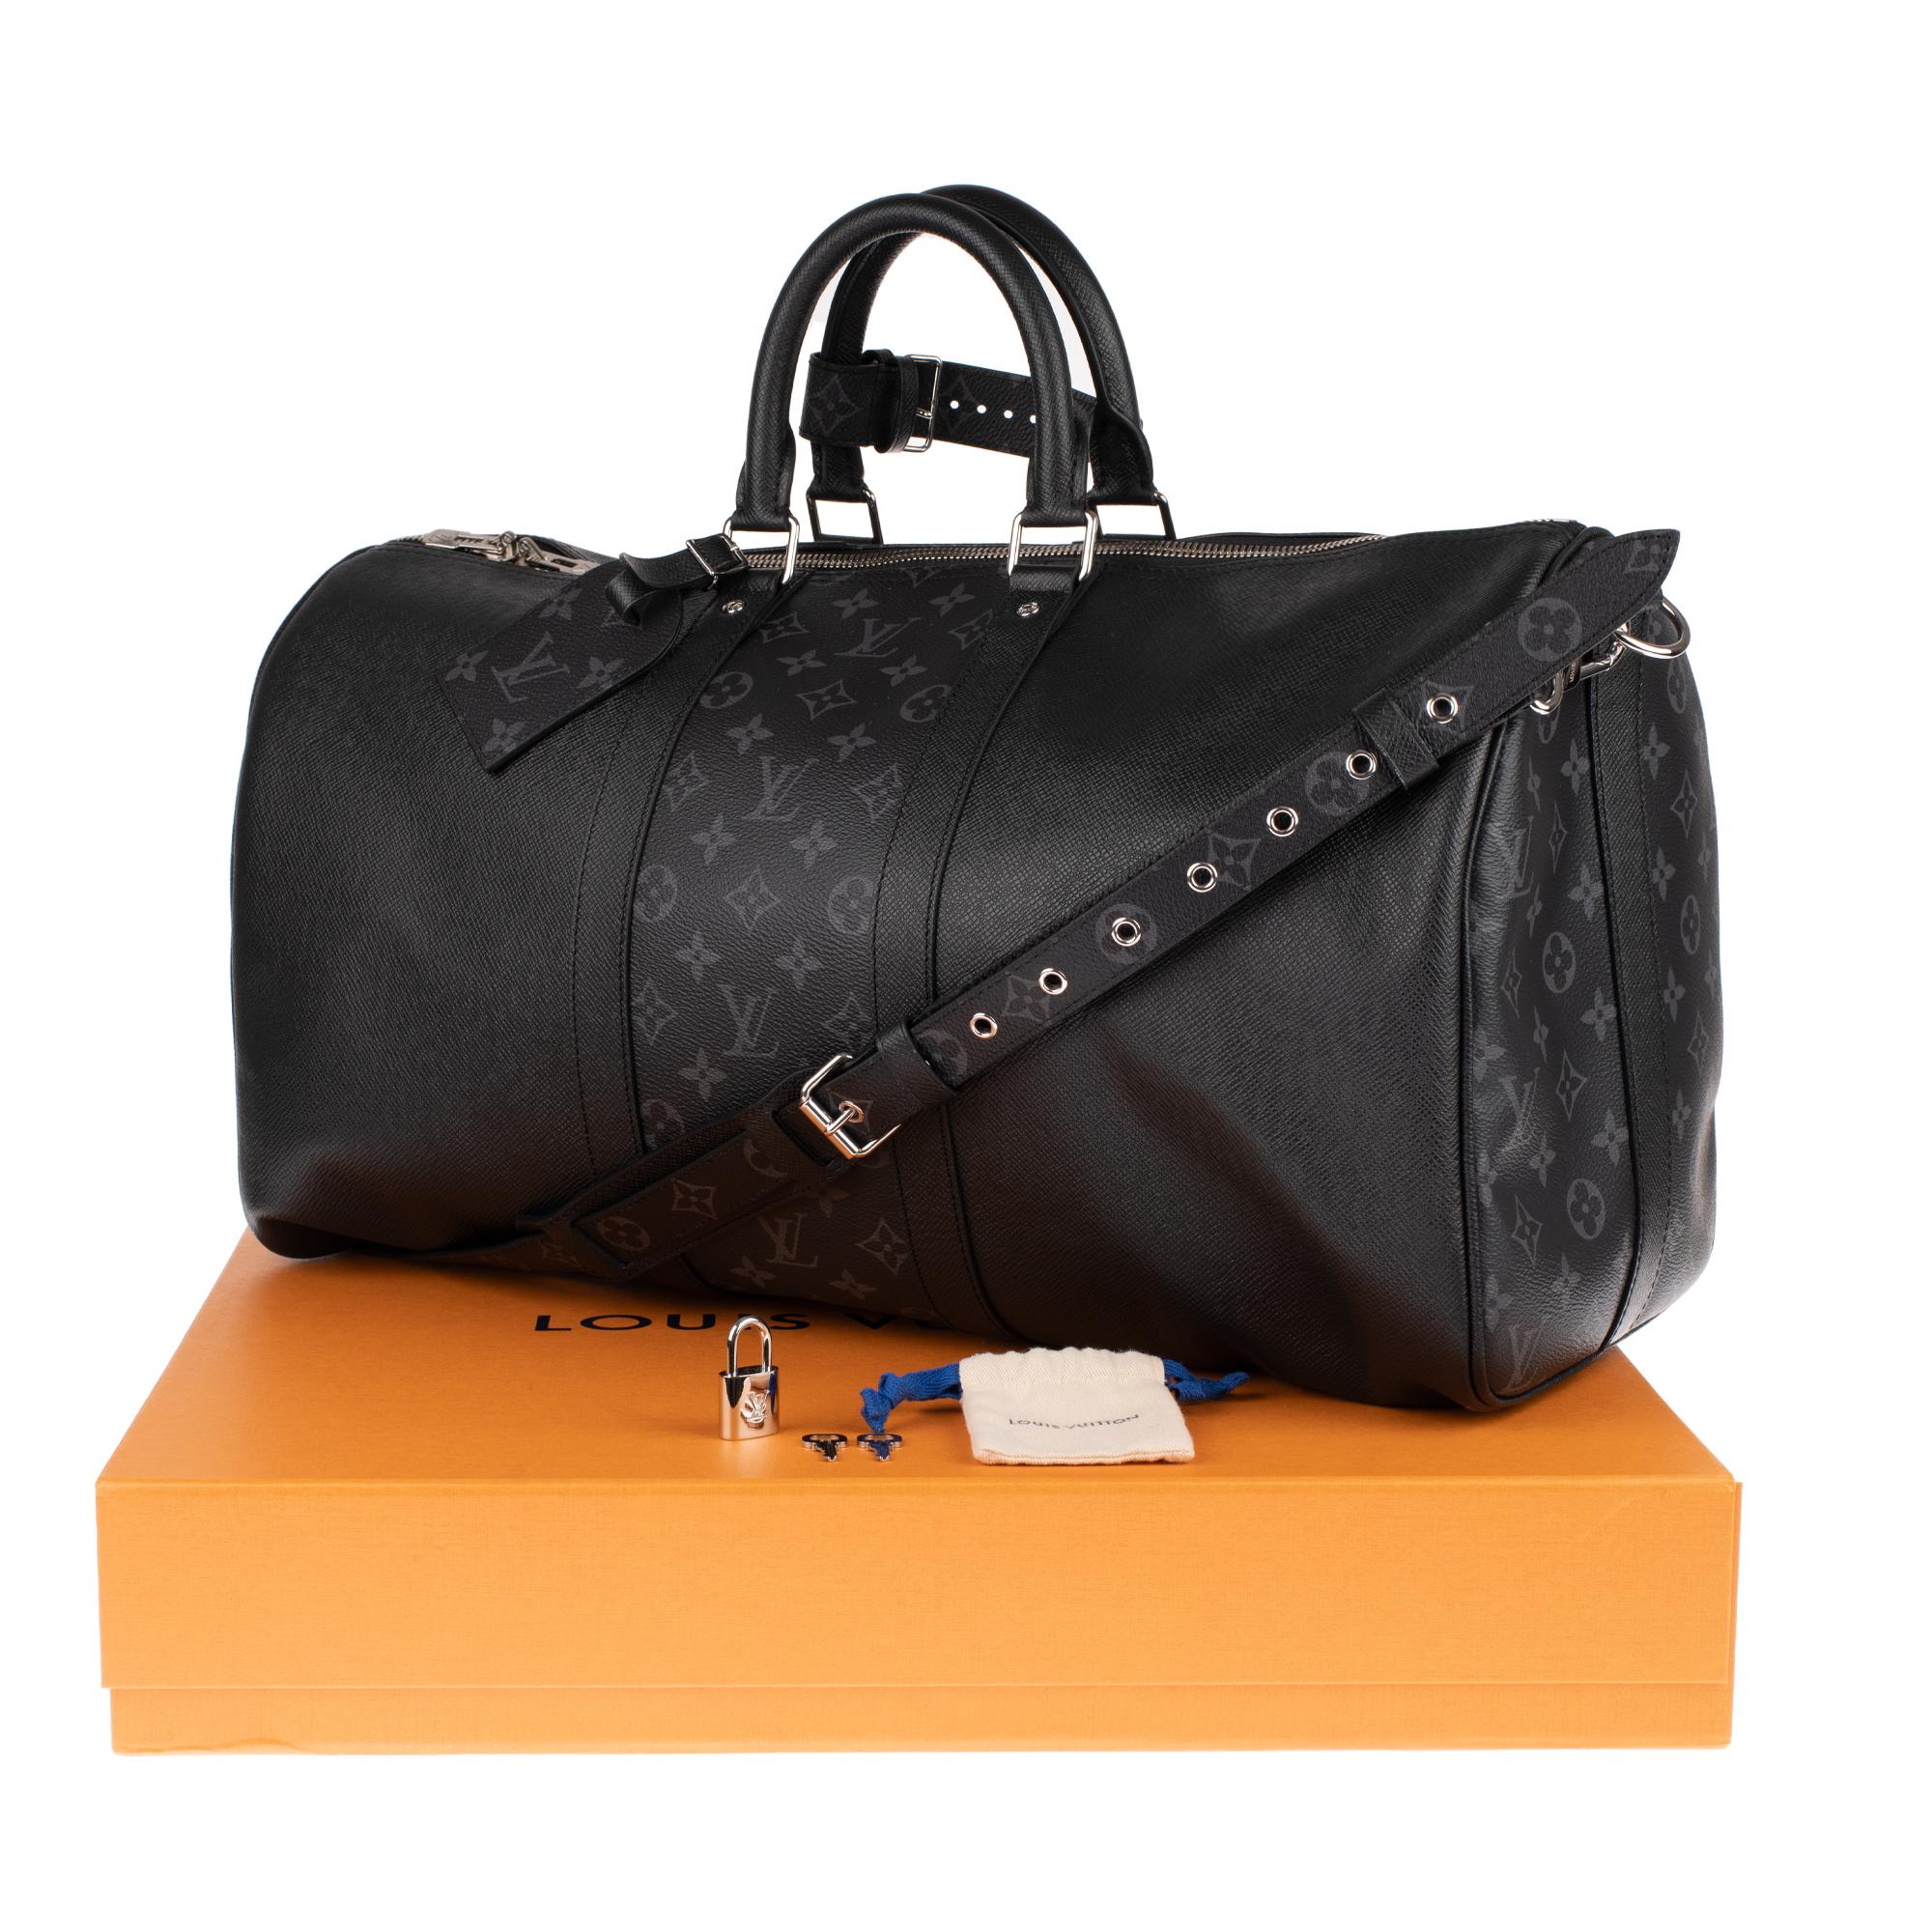 Rare brand new Louis Vuitton Keepall 50 Taigarama travel bag with strap ! 5